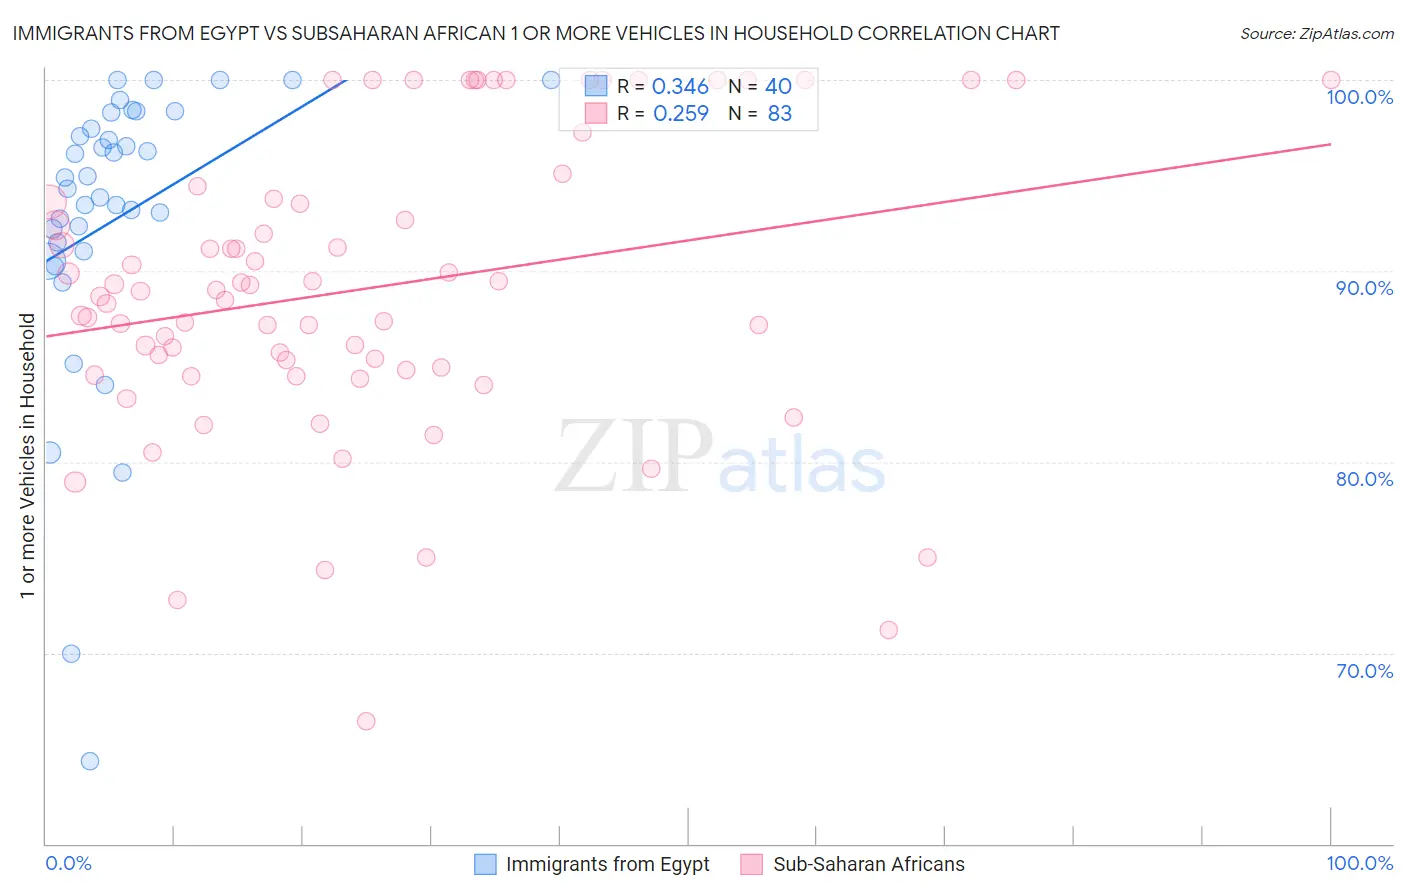 Immigrants from Egypt vs Subsaharan African 1 or more Vehicles in Household